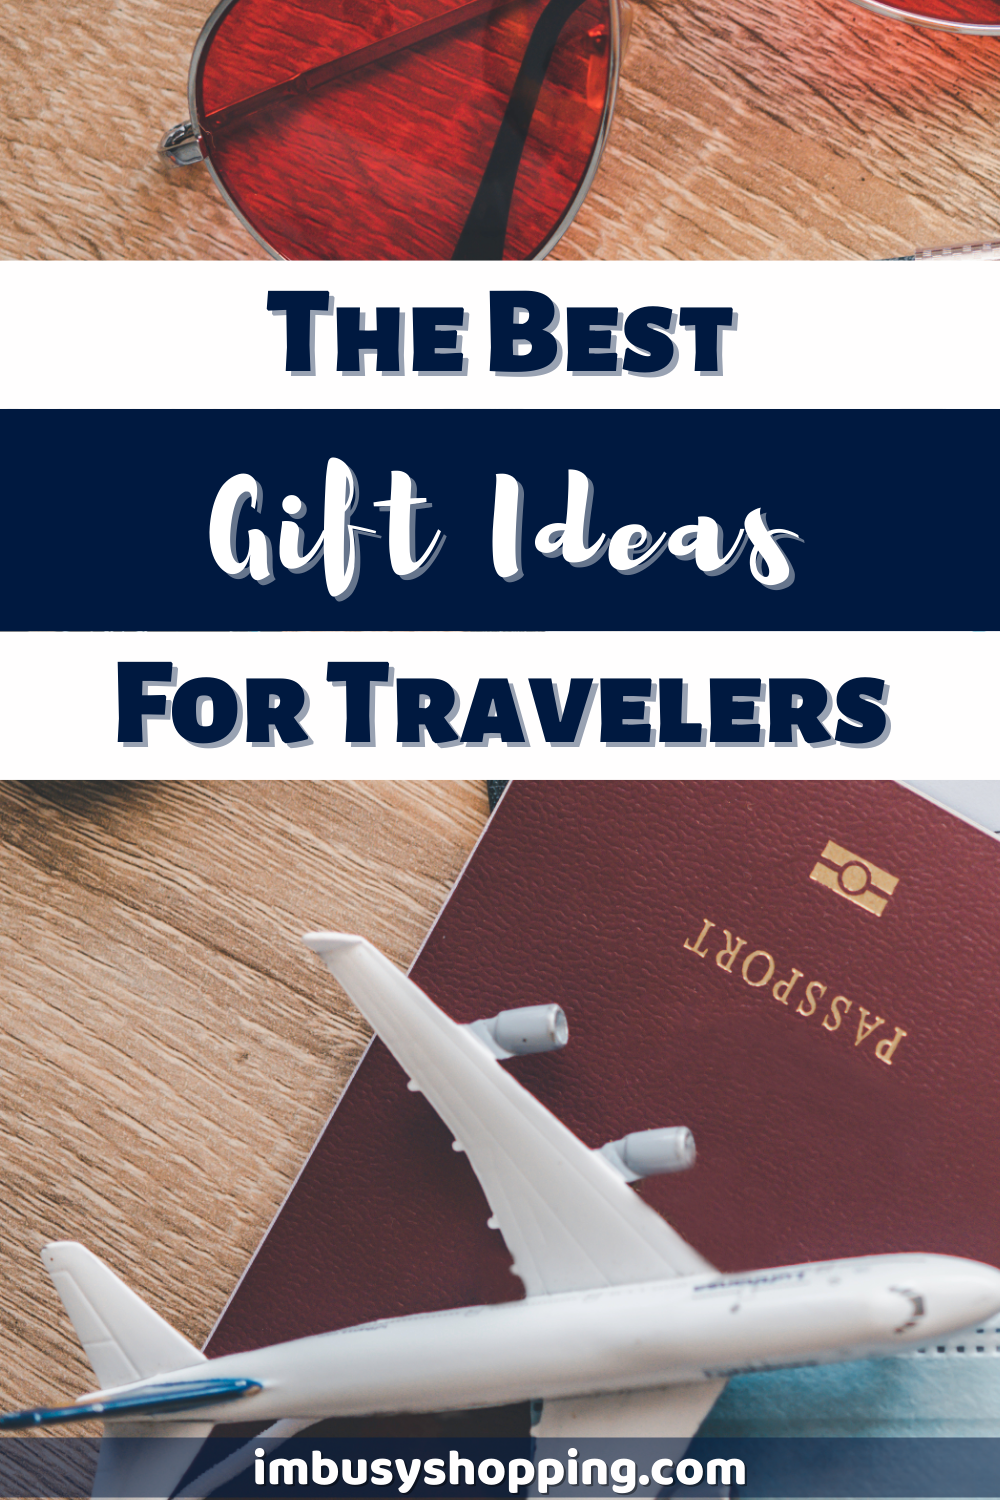 pin image with toy airplane placed on top of passport and a red-tinted shades, with title "The Best Gift Ideas For Travelers"